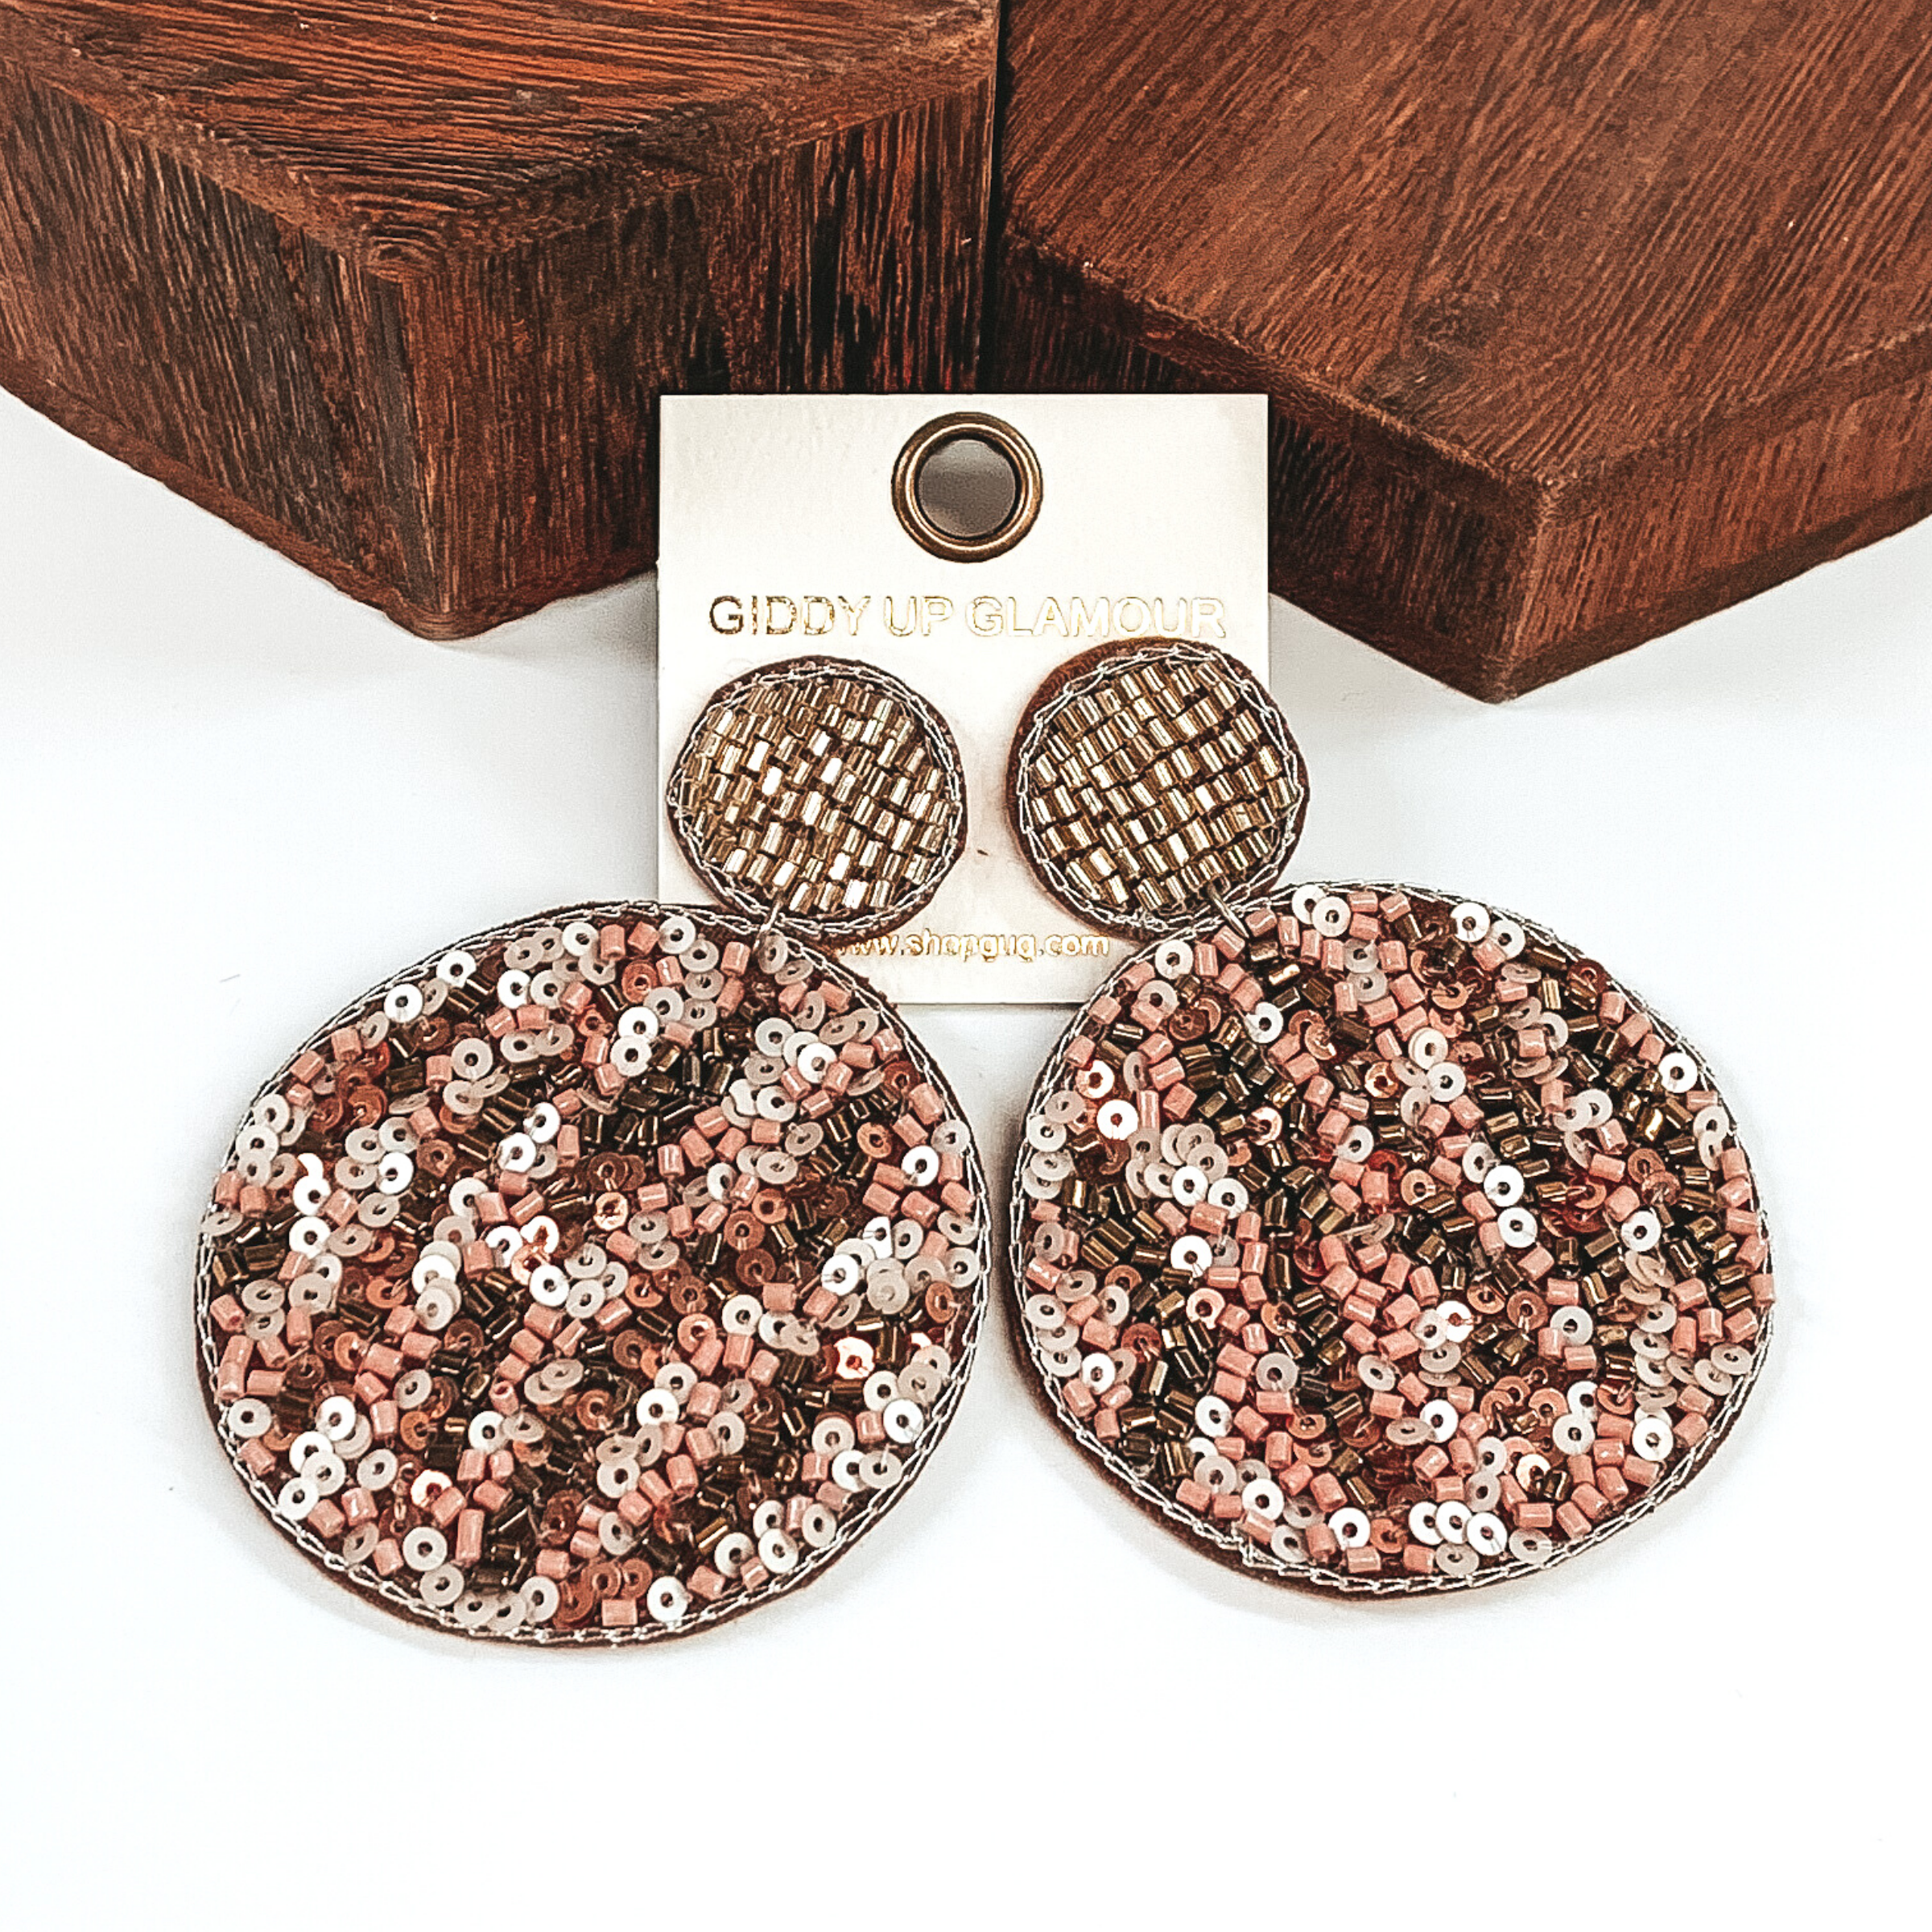 The studs are a small beaded circle with a hanging larger beaded circle. These beaded earrings includes the colors ivory, nude, light pink, and gold in a leopard design. These earrings are pictured on a white background with brown blocks behind the earrings.